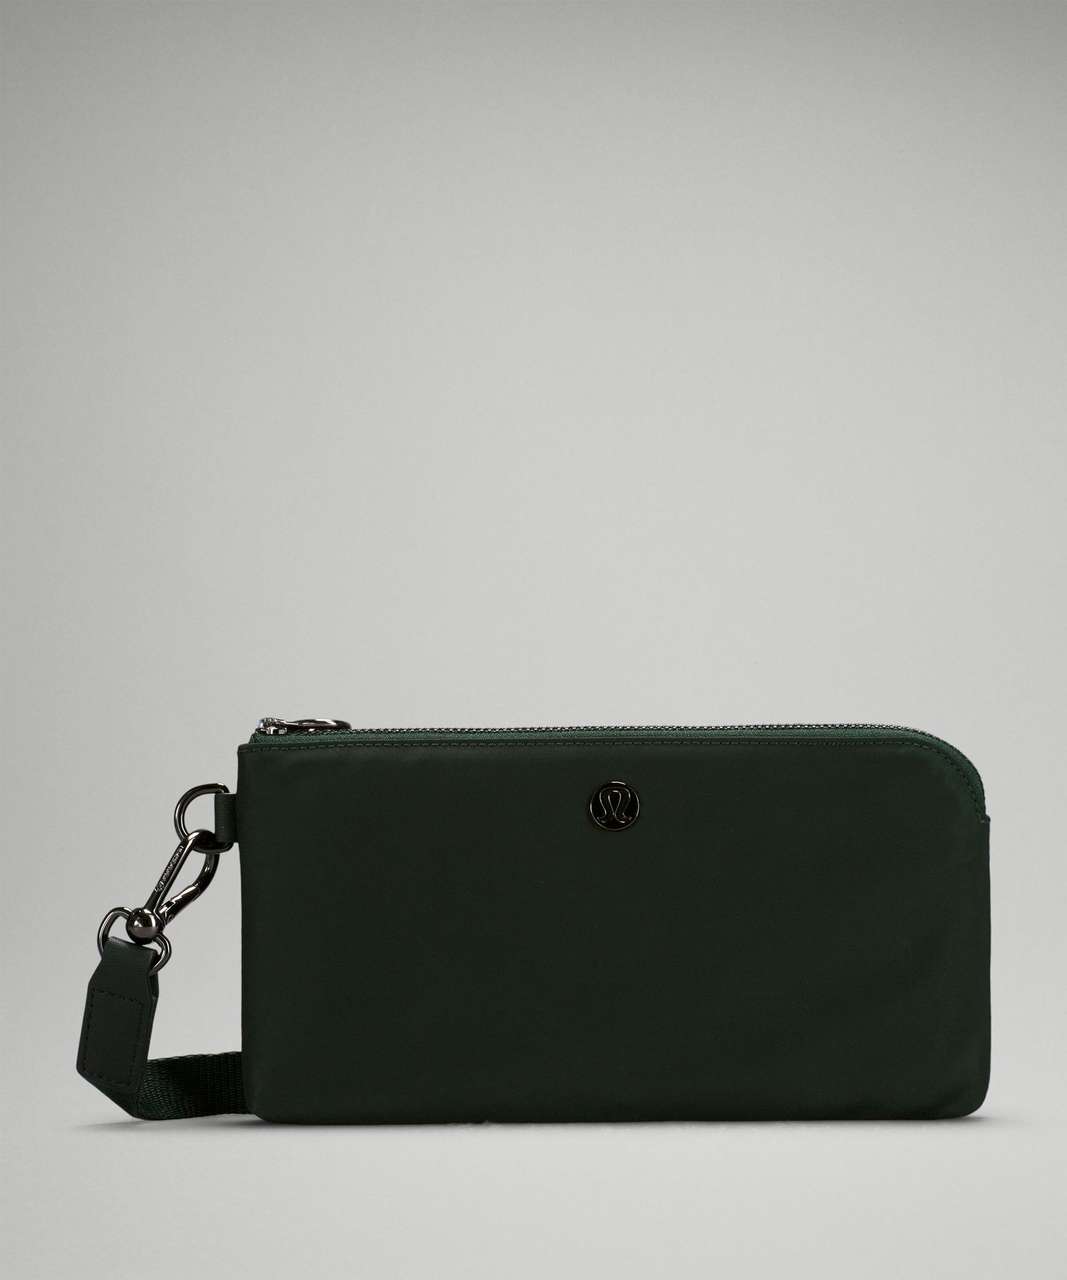 Lululemon Now and Always Pouch - Rainforest Green / Black